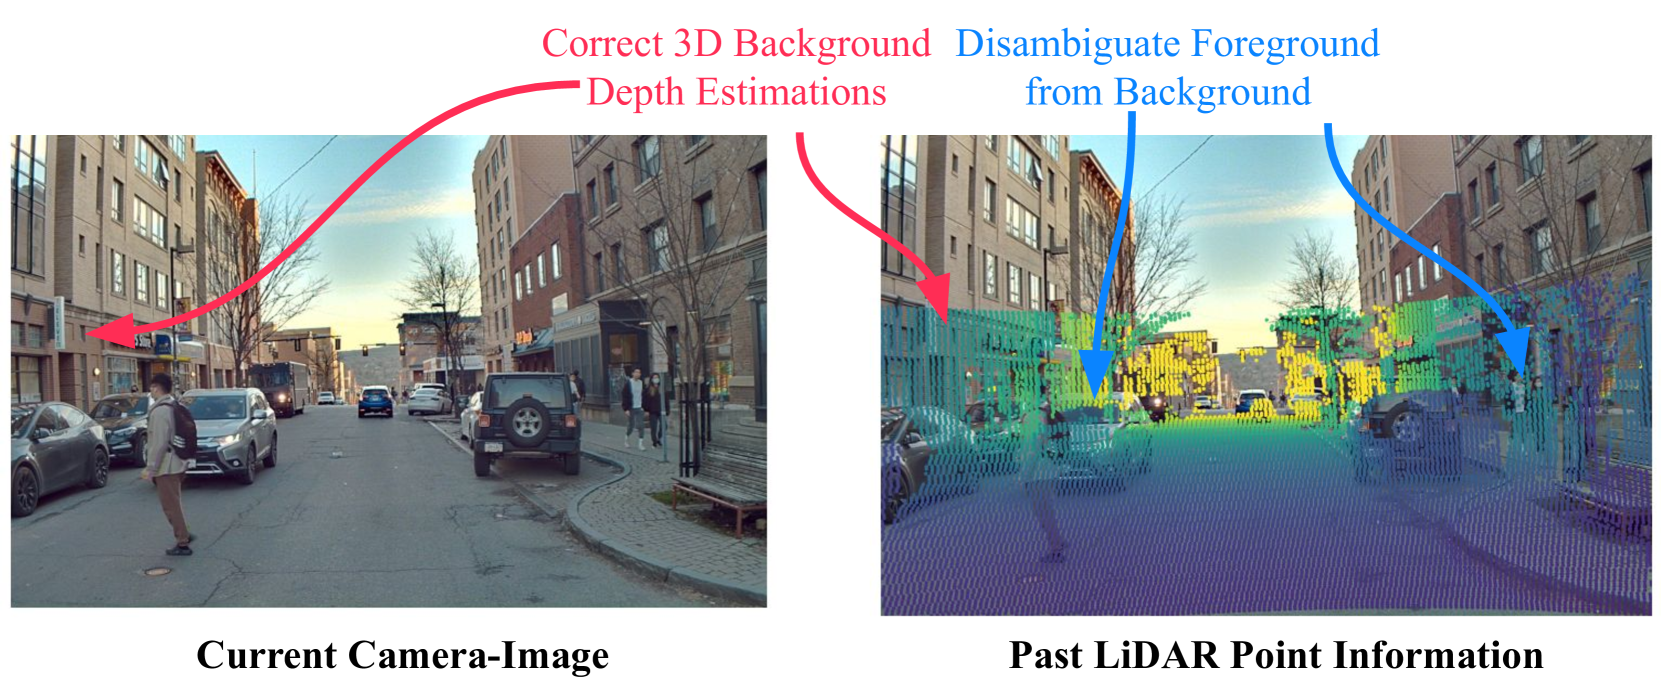 Better Monocular 3D Detectors with LiDAR from the Past